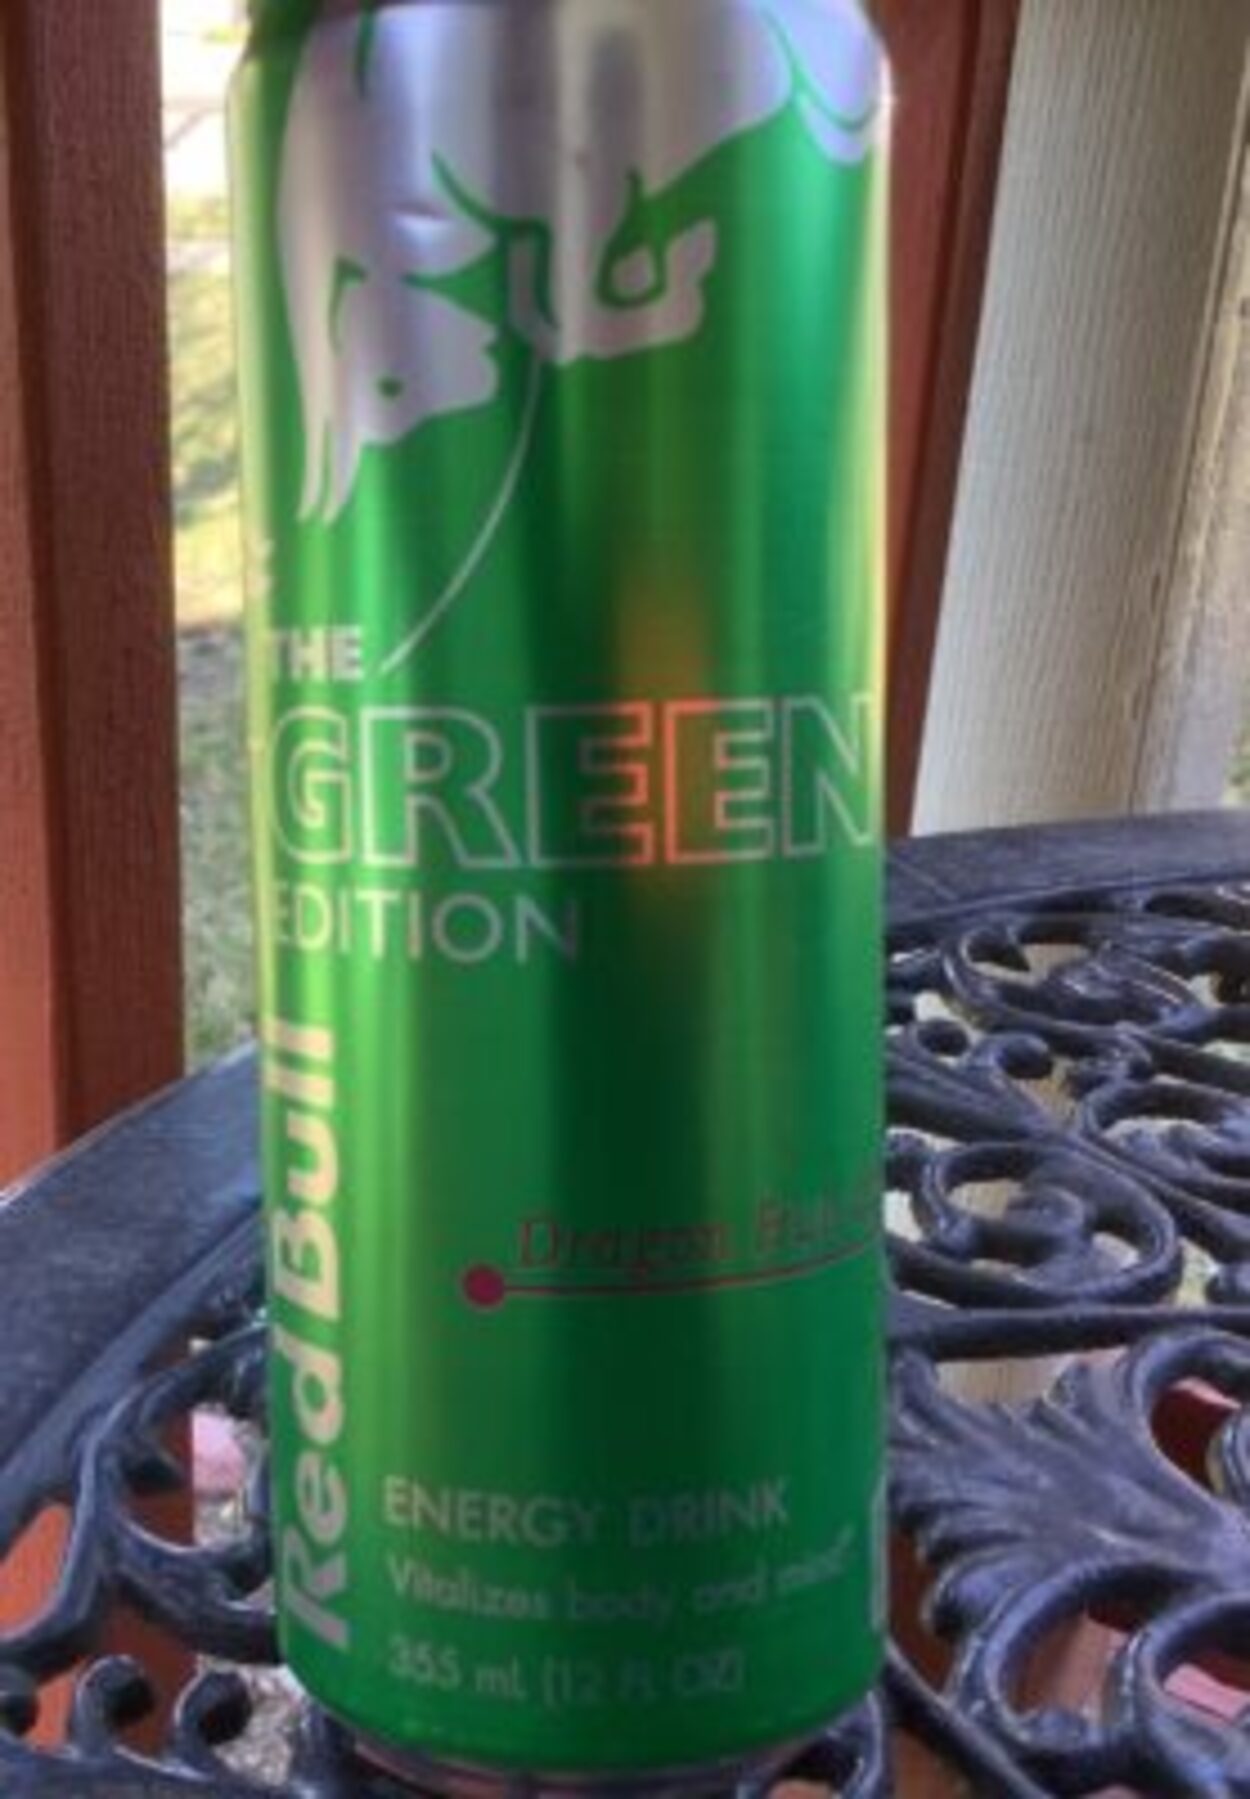 Red Bull Green Edition Review (Answered)